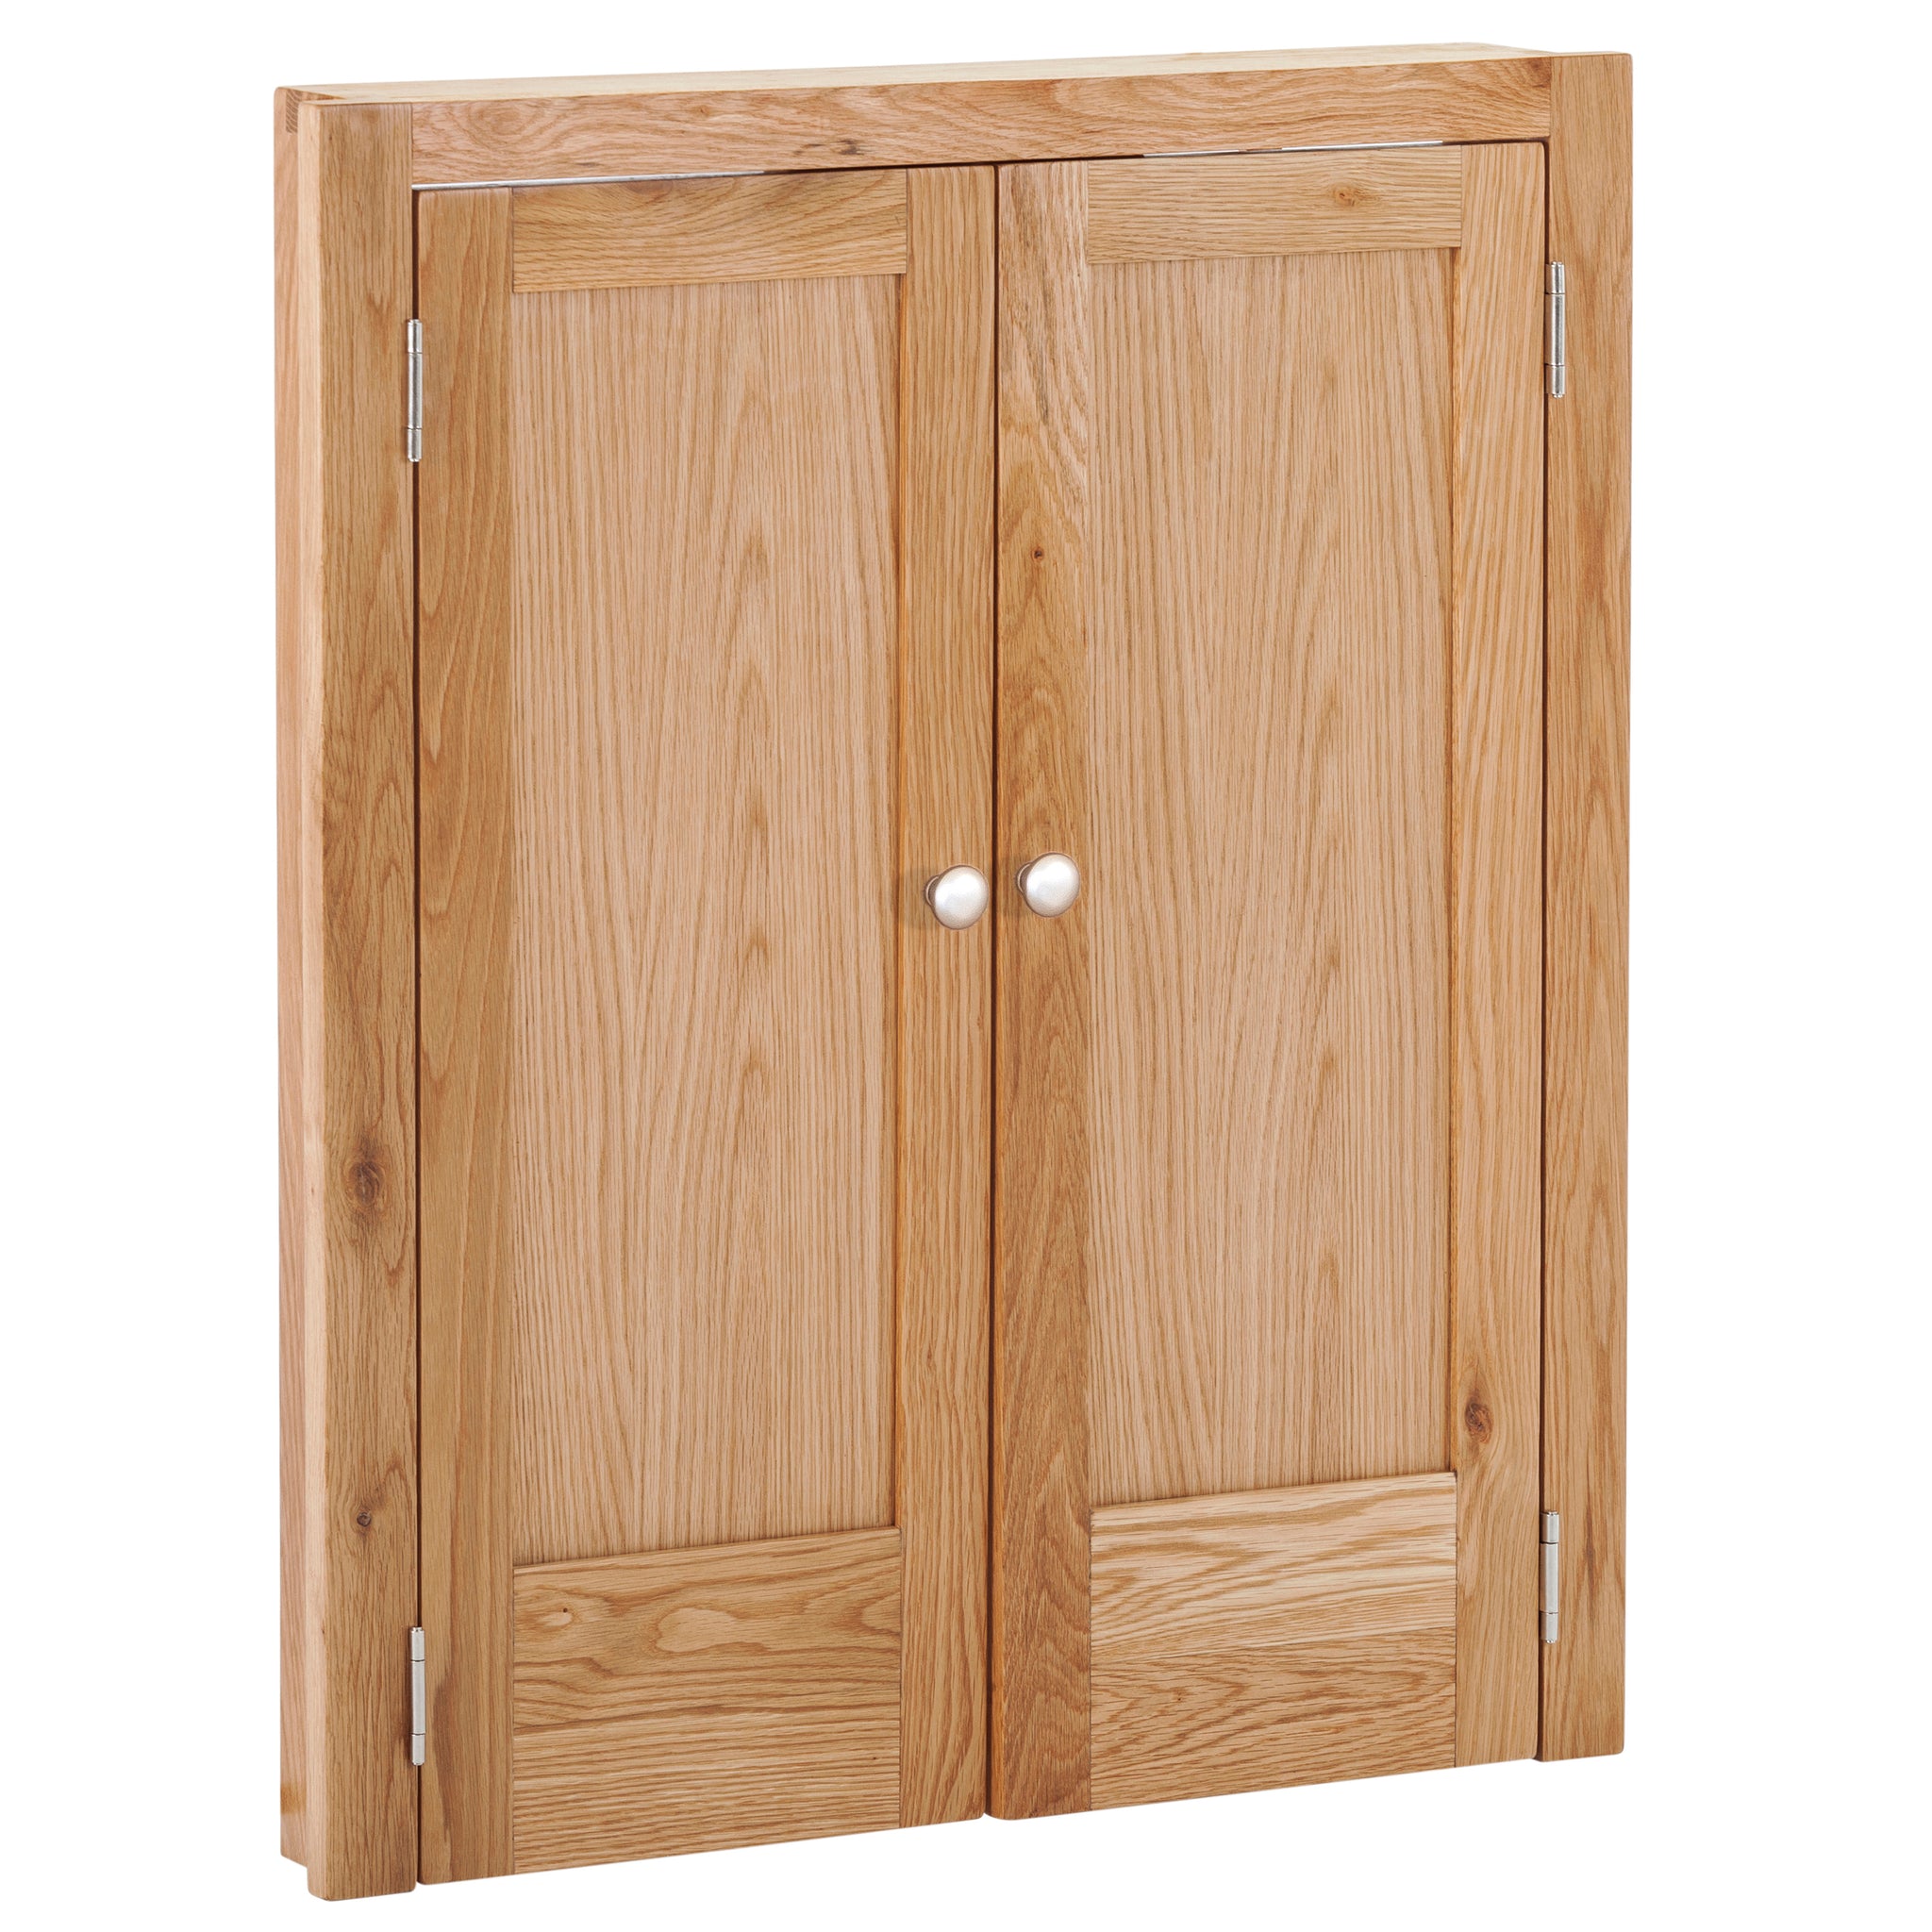 Non-Integrated Appliance Frame and Doors in Oak